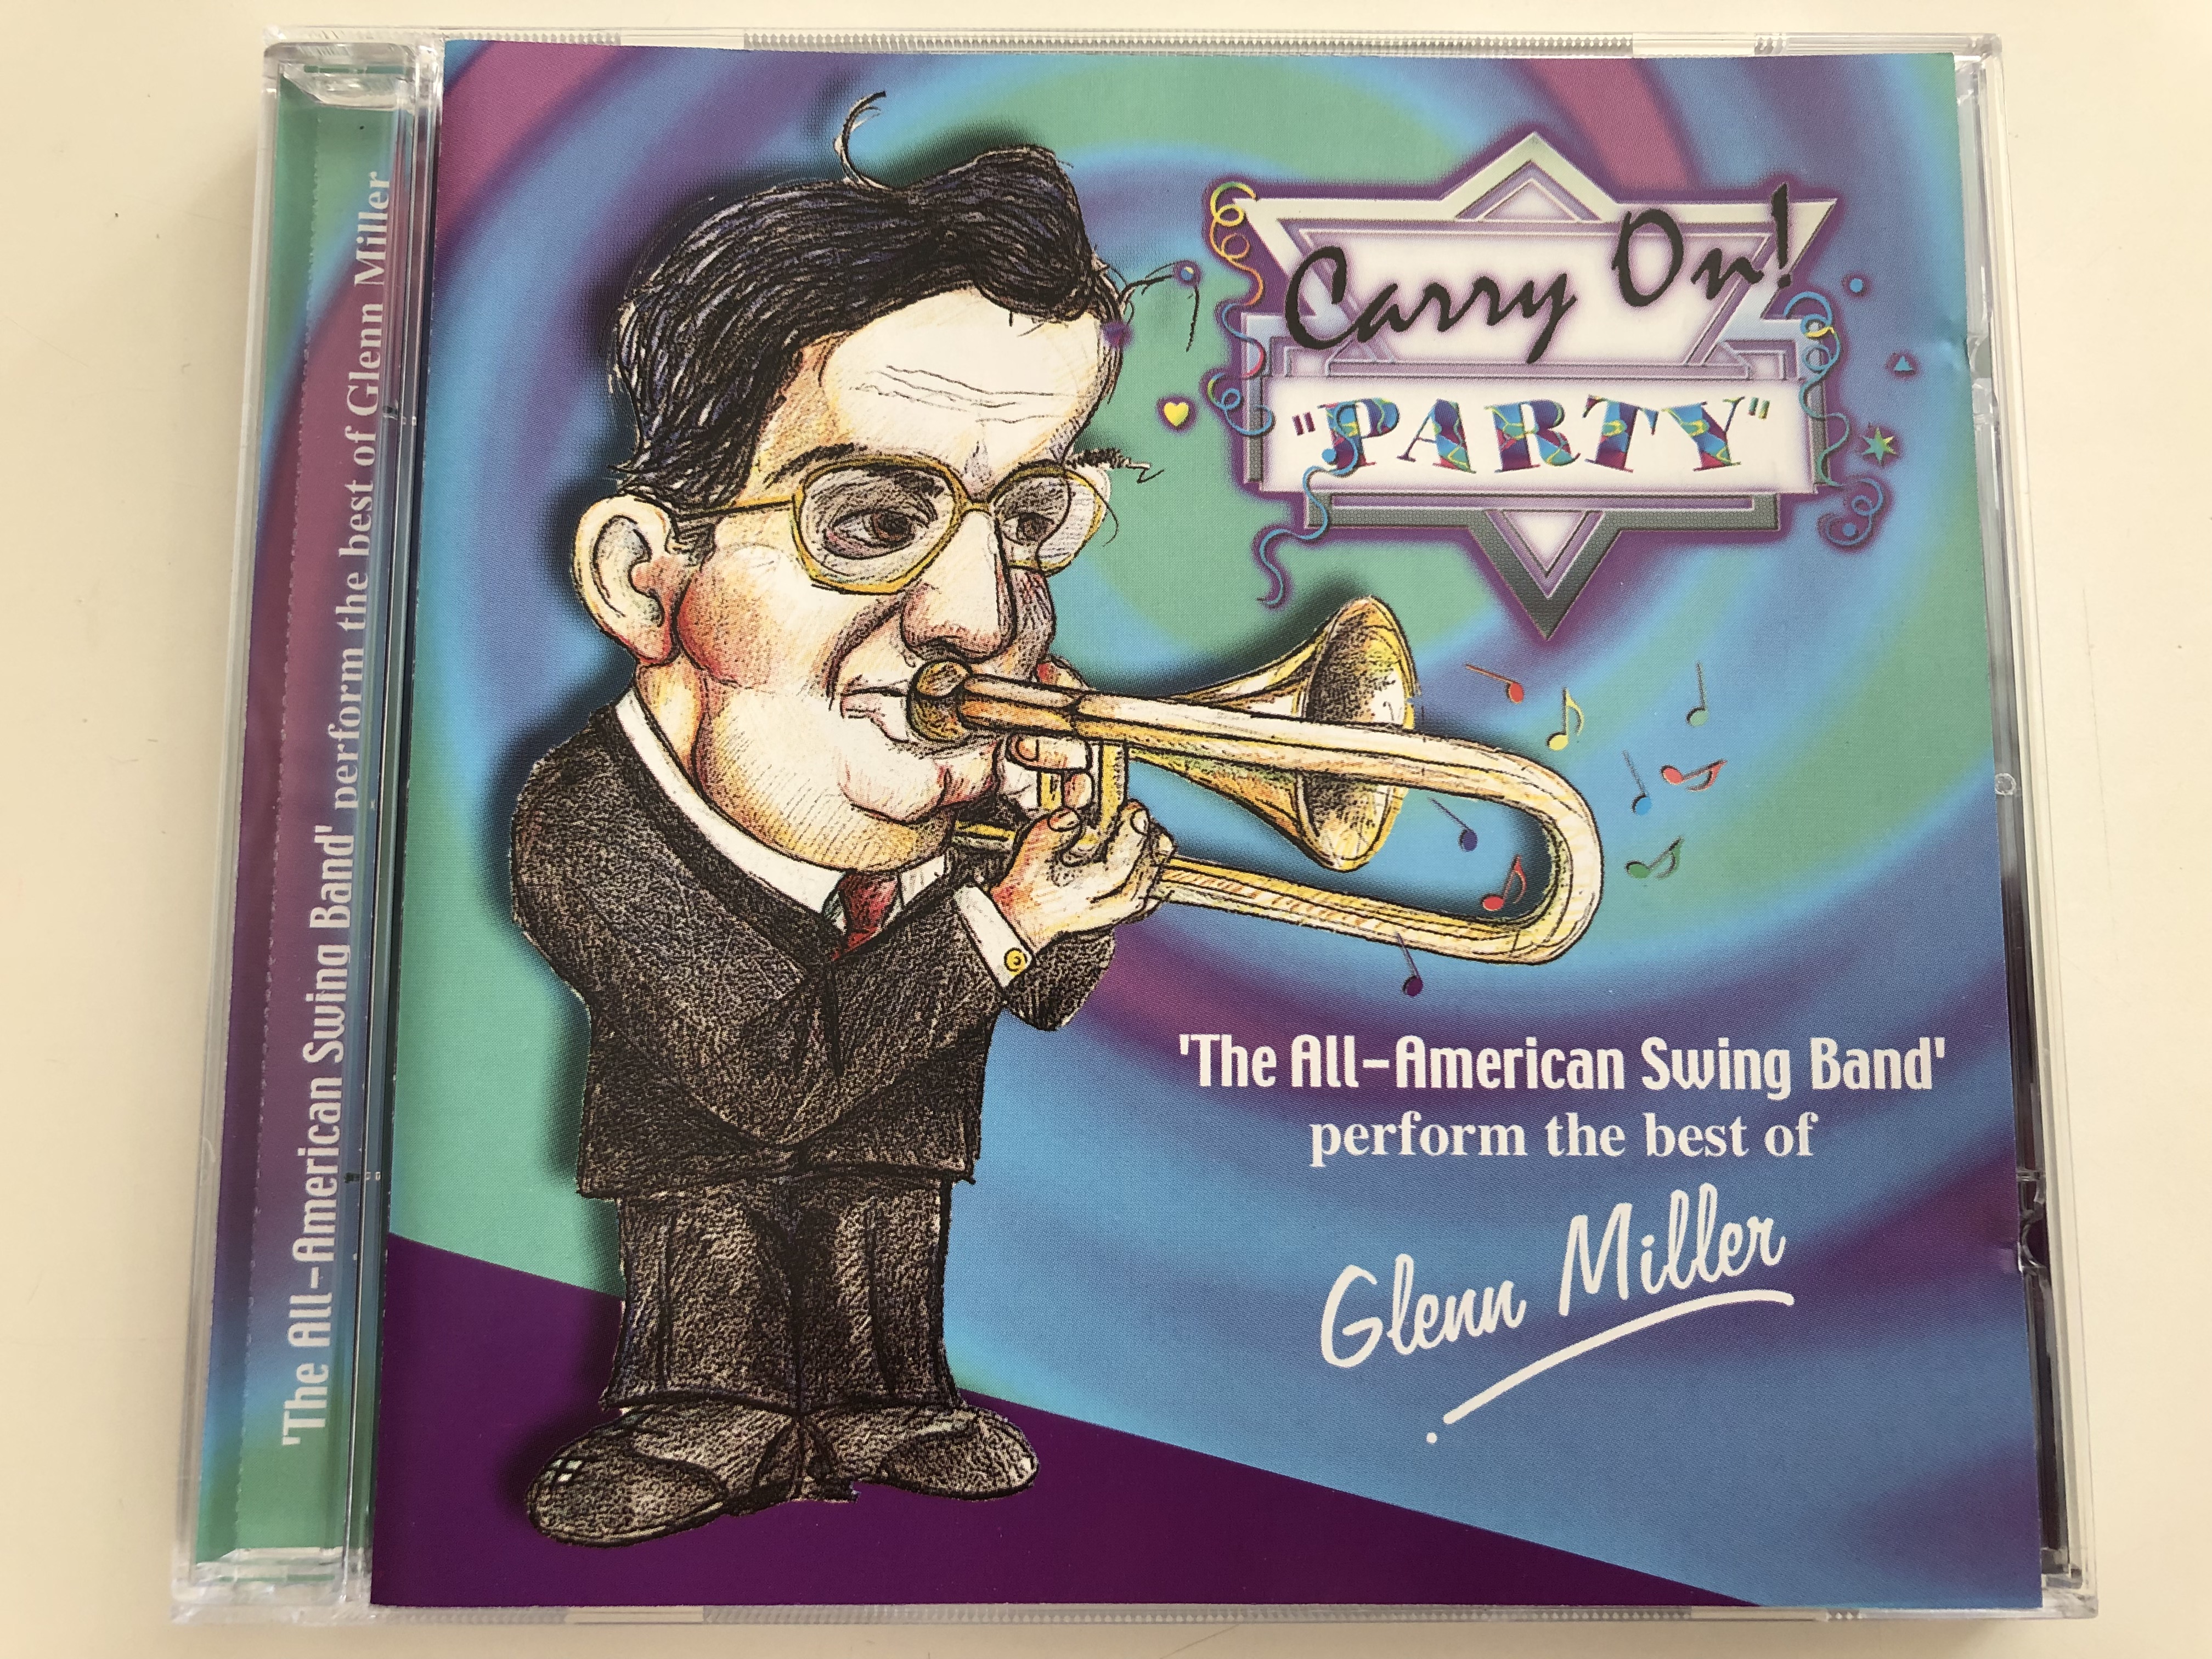 the-all-american-swing-band-performs-the-best-of-glenn-miller-carry-on-party-audio-cd-gfs172-1-.jpg